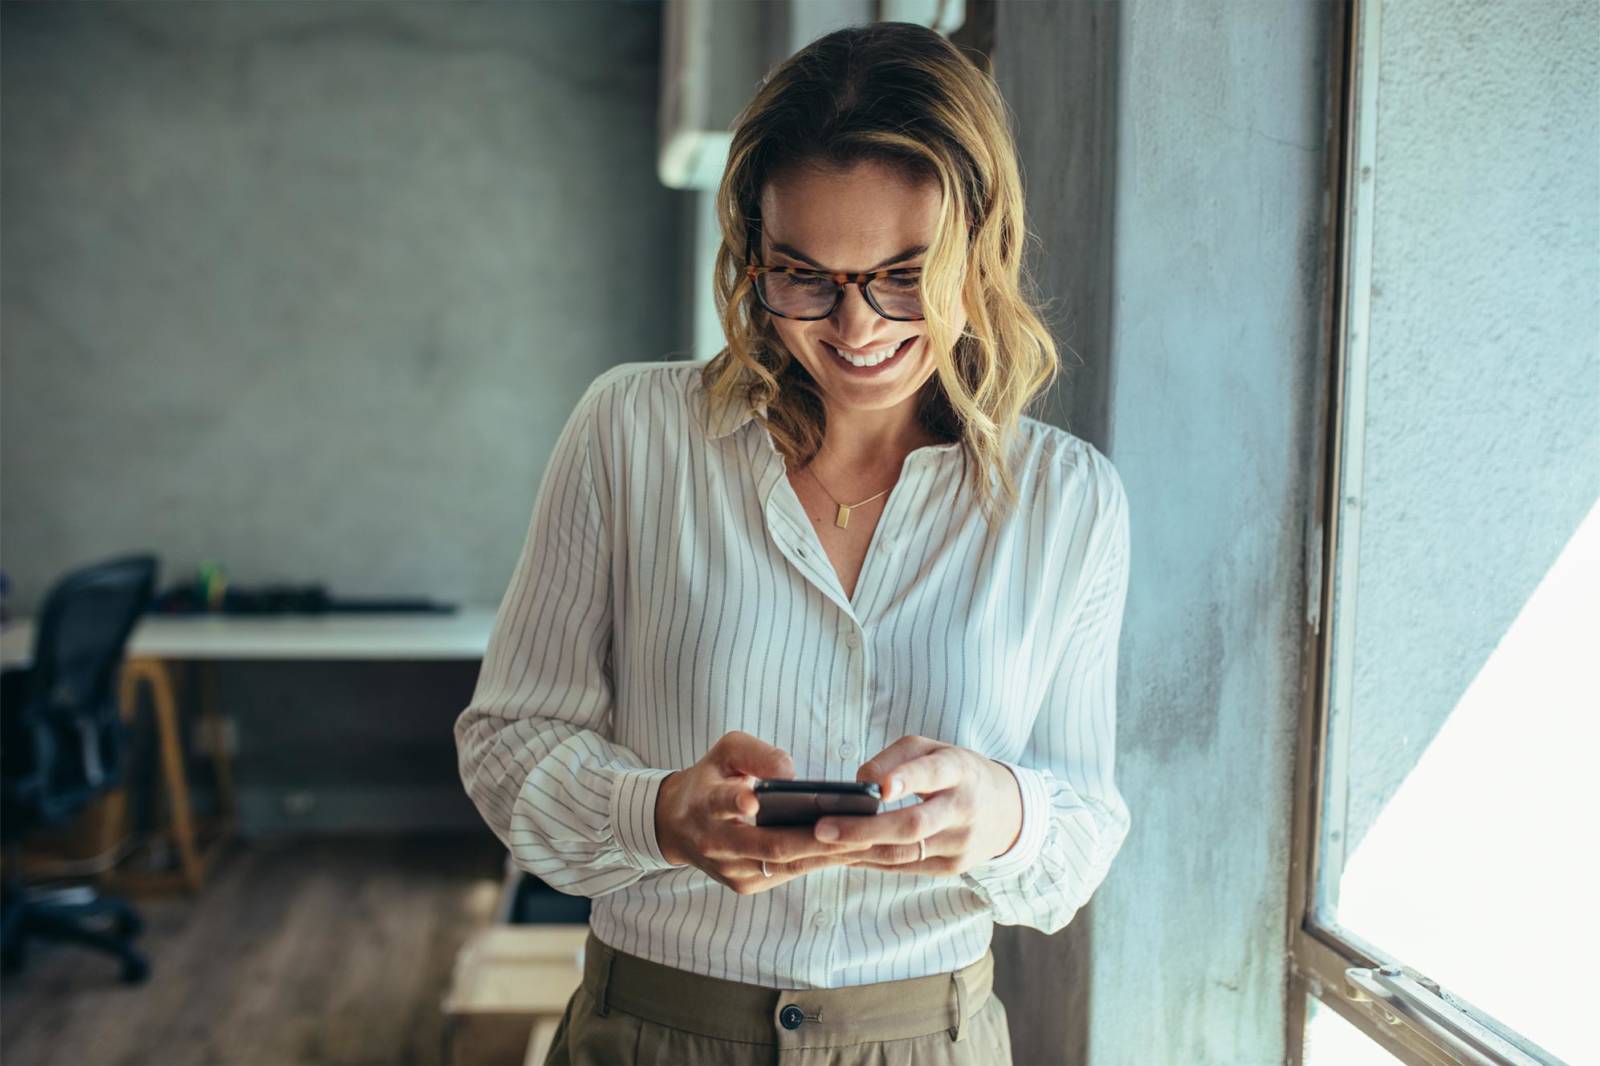 Business professional woman holding a cell phone